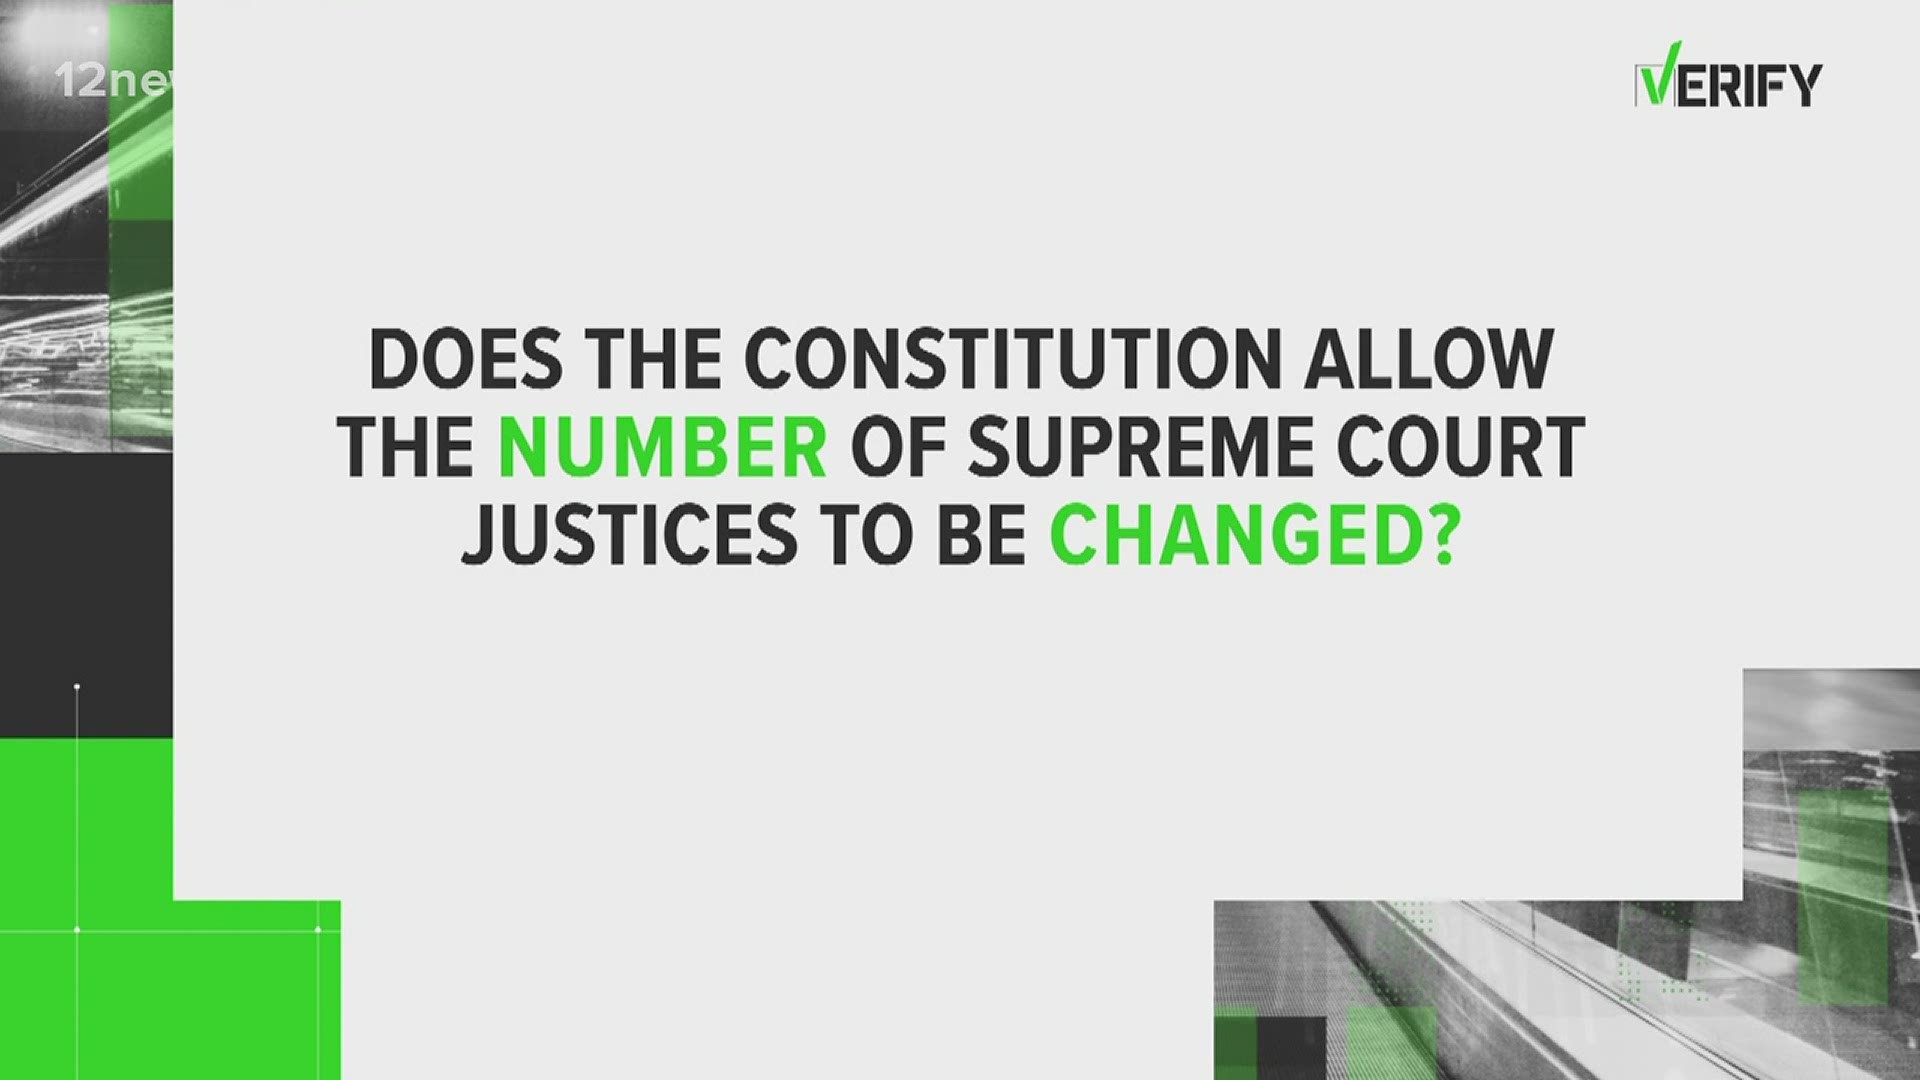 Yes, the constitution does allow the number of Supreme Court Justices to be changed.